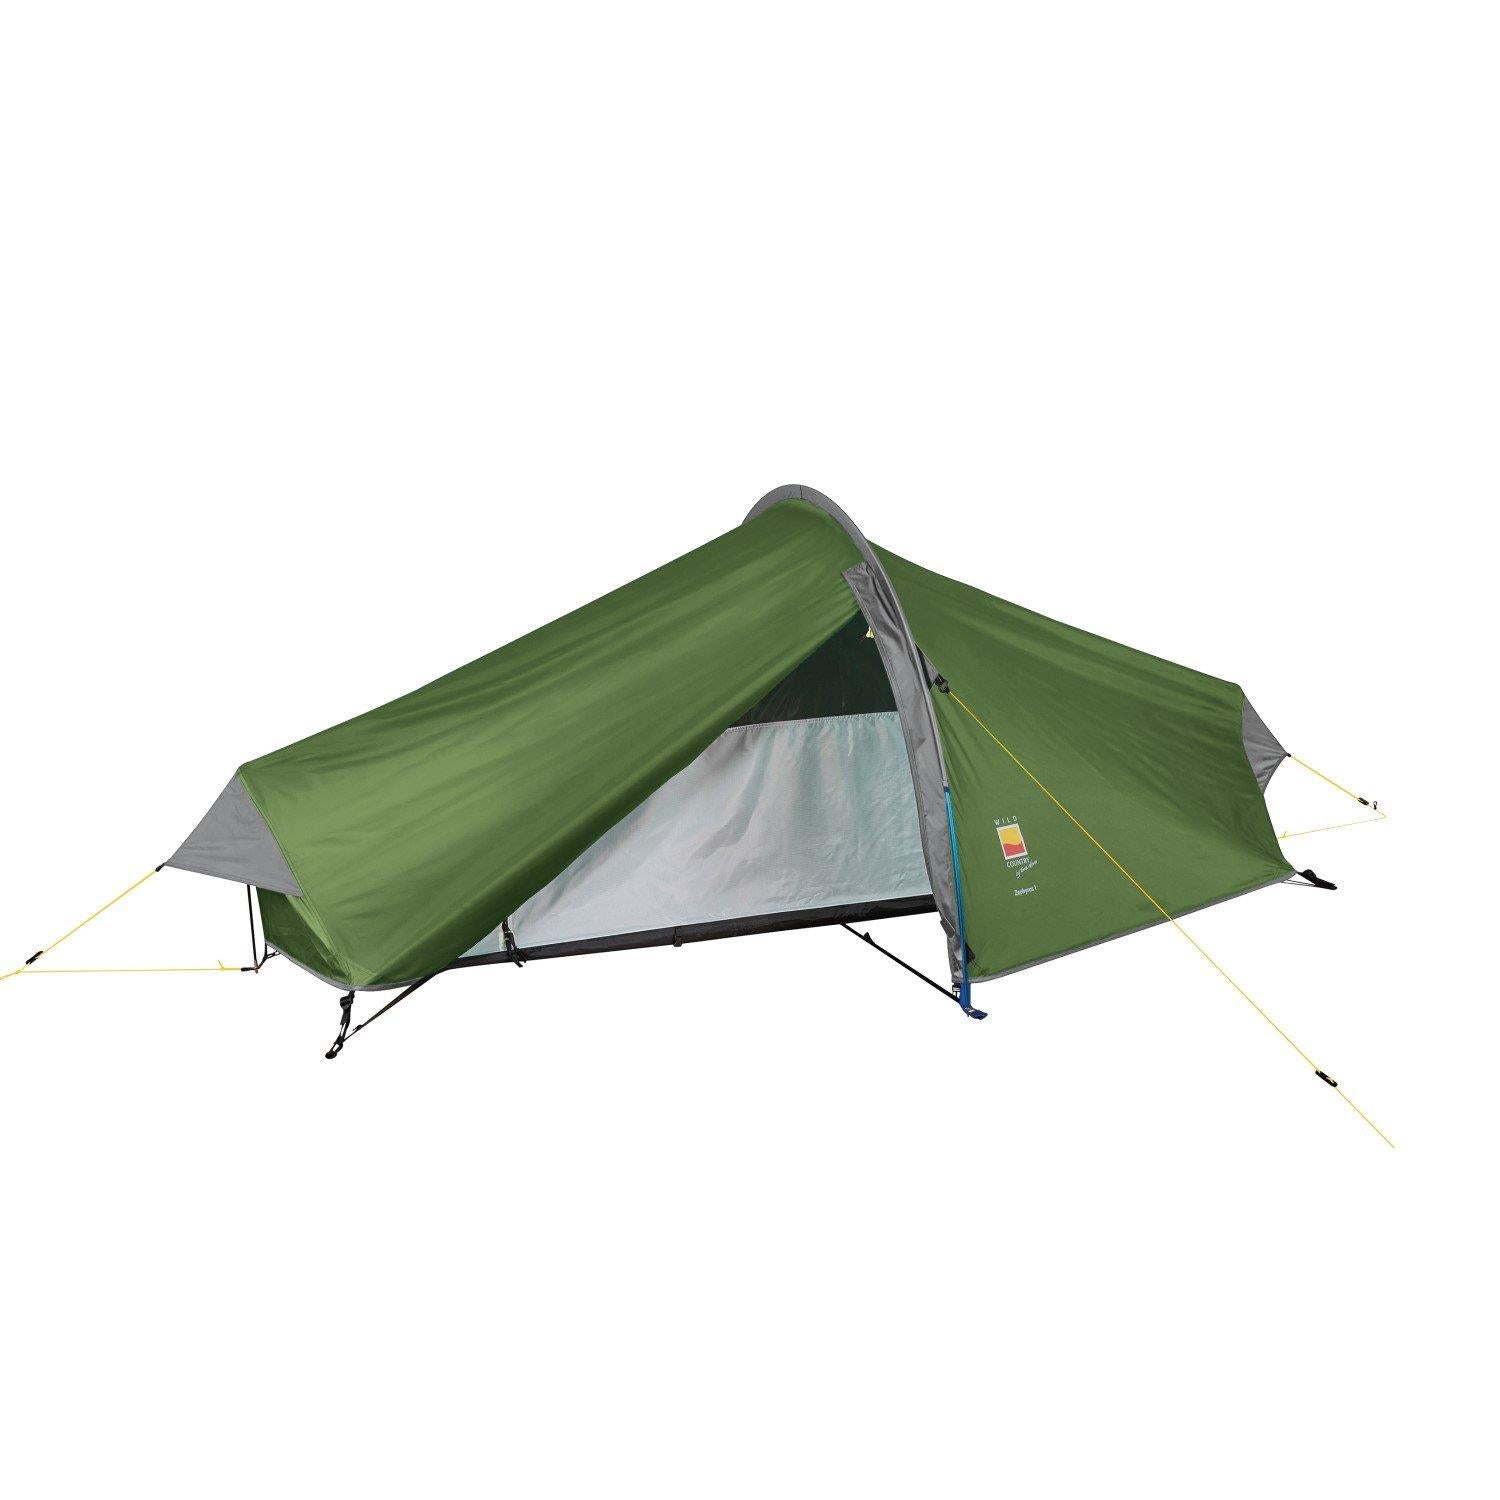 Wild Country Zephyros Compact 1 V3 Tent - 1 Man Tent (Cactus Green)